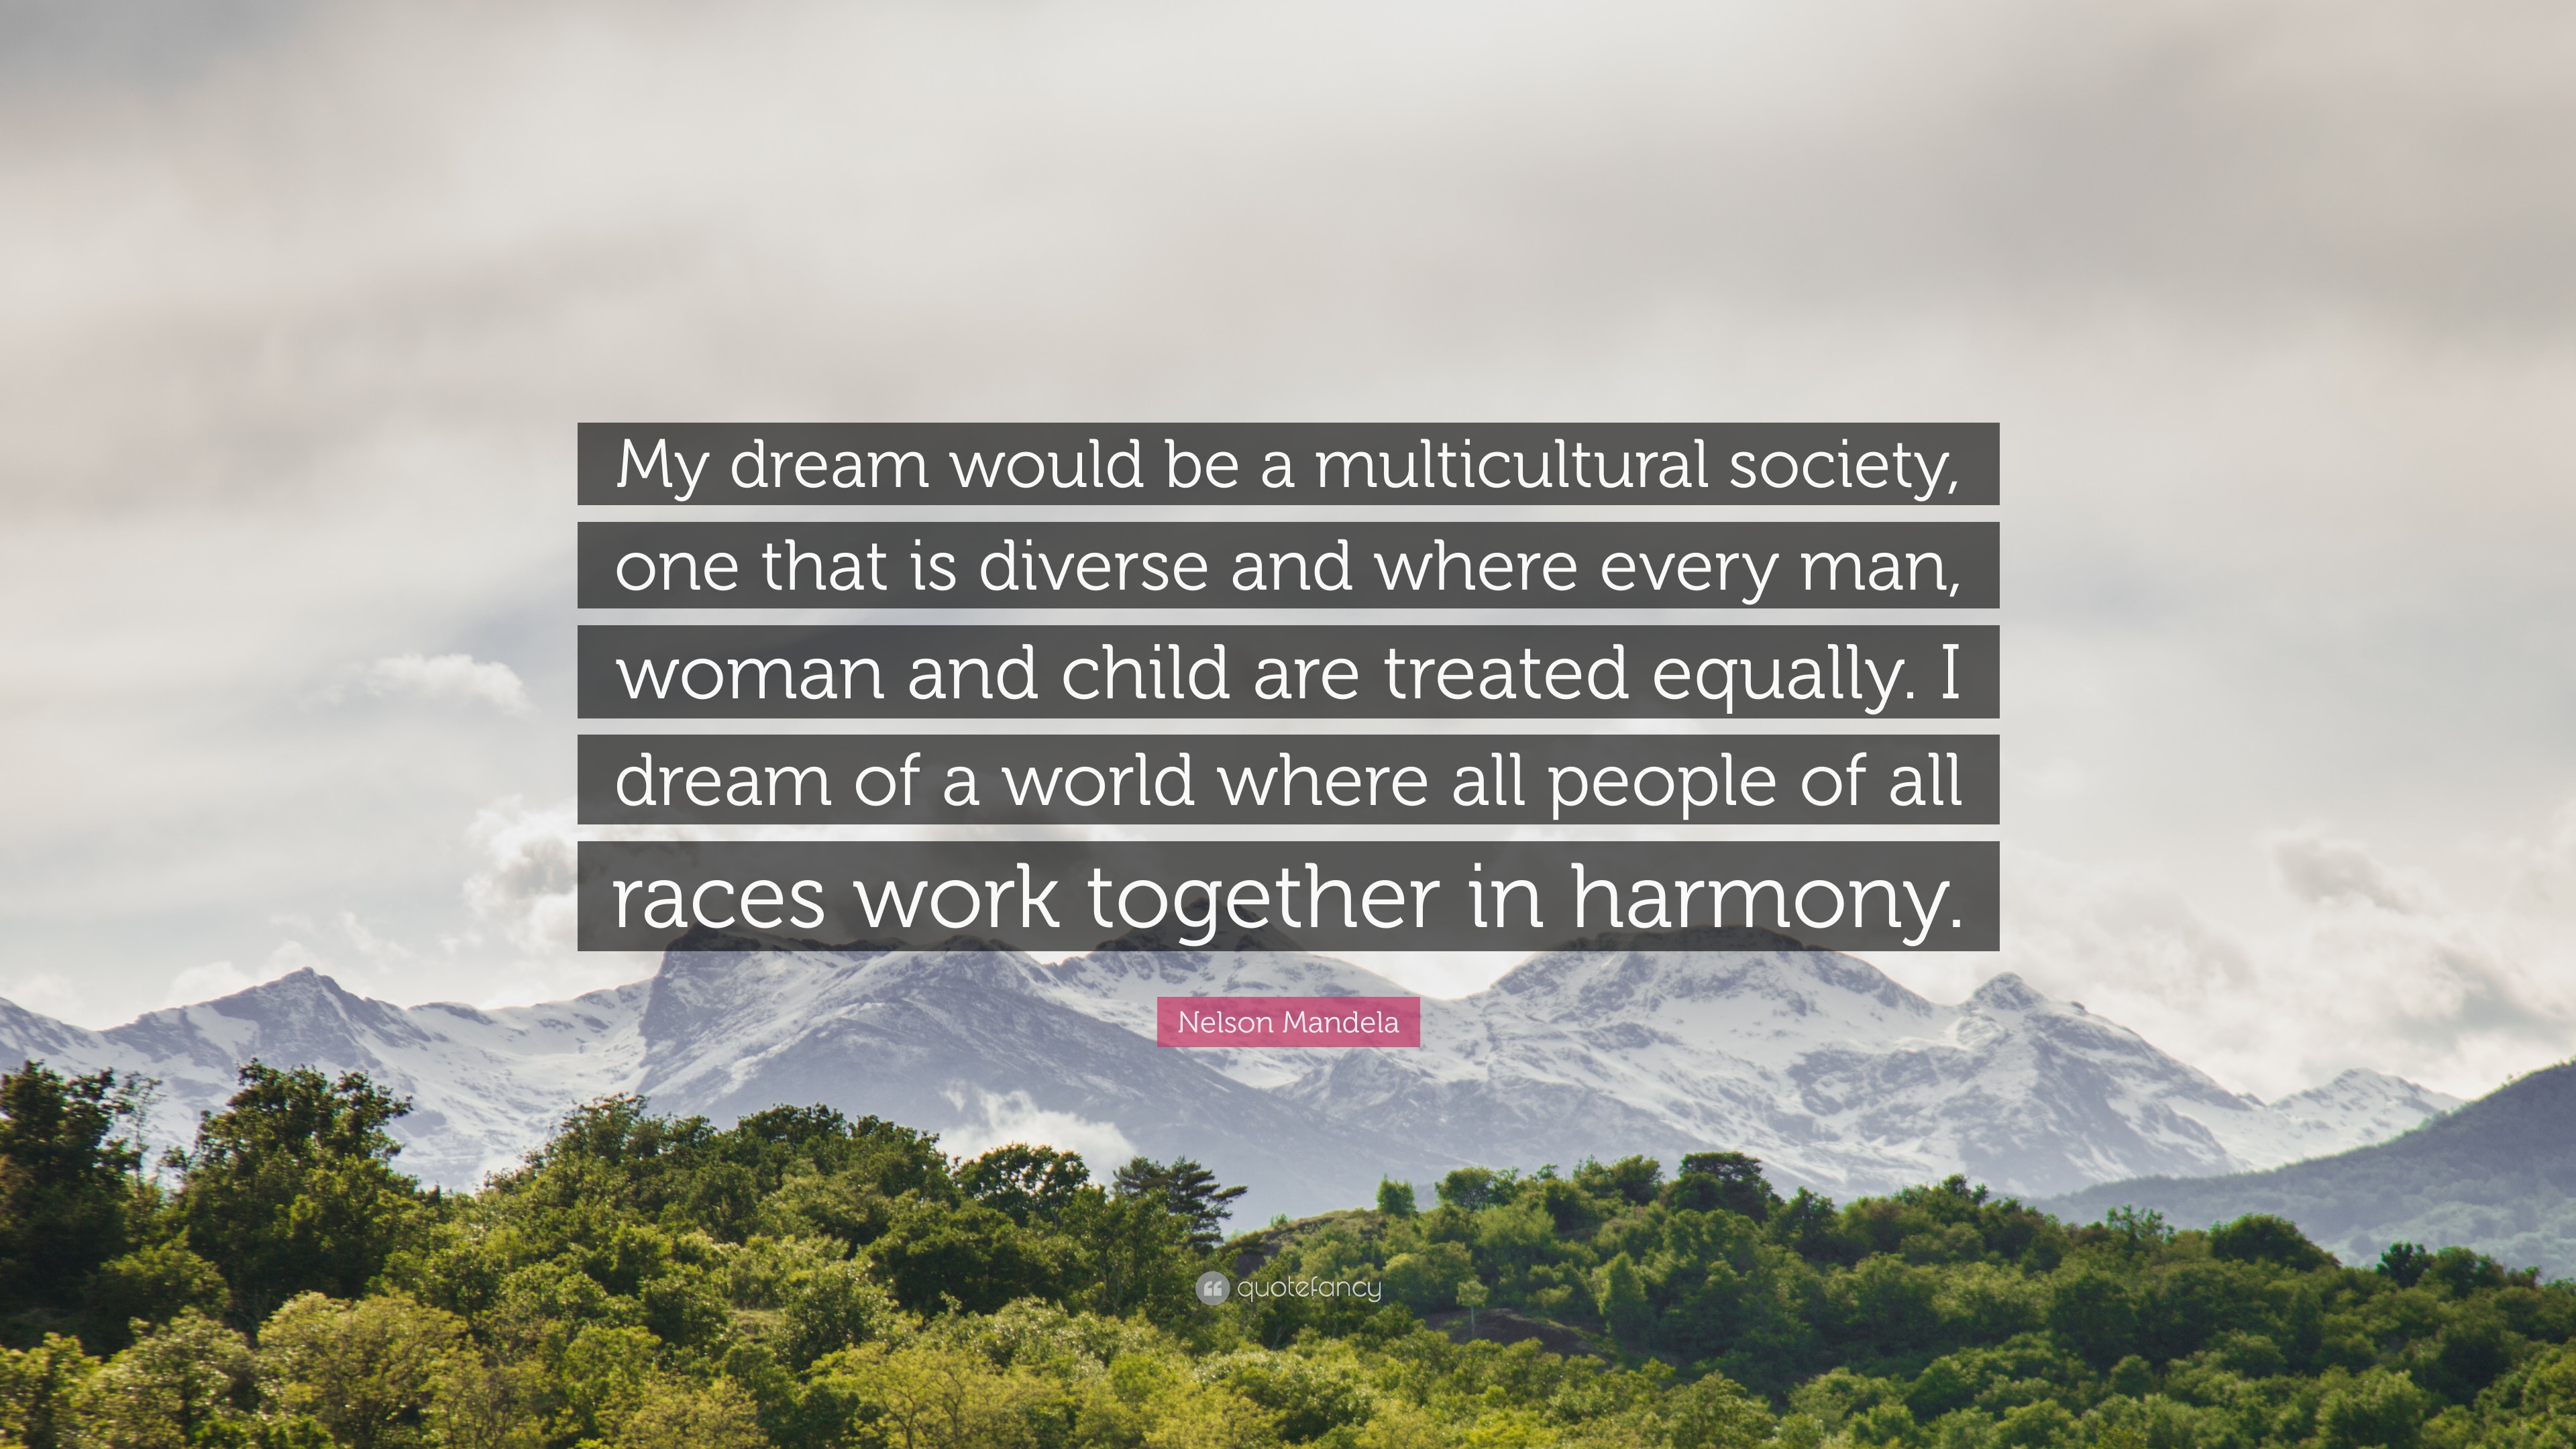 Nelson Mandela Quote: “My dream would be a multicultural